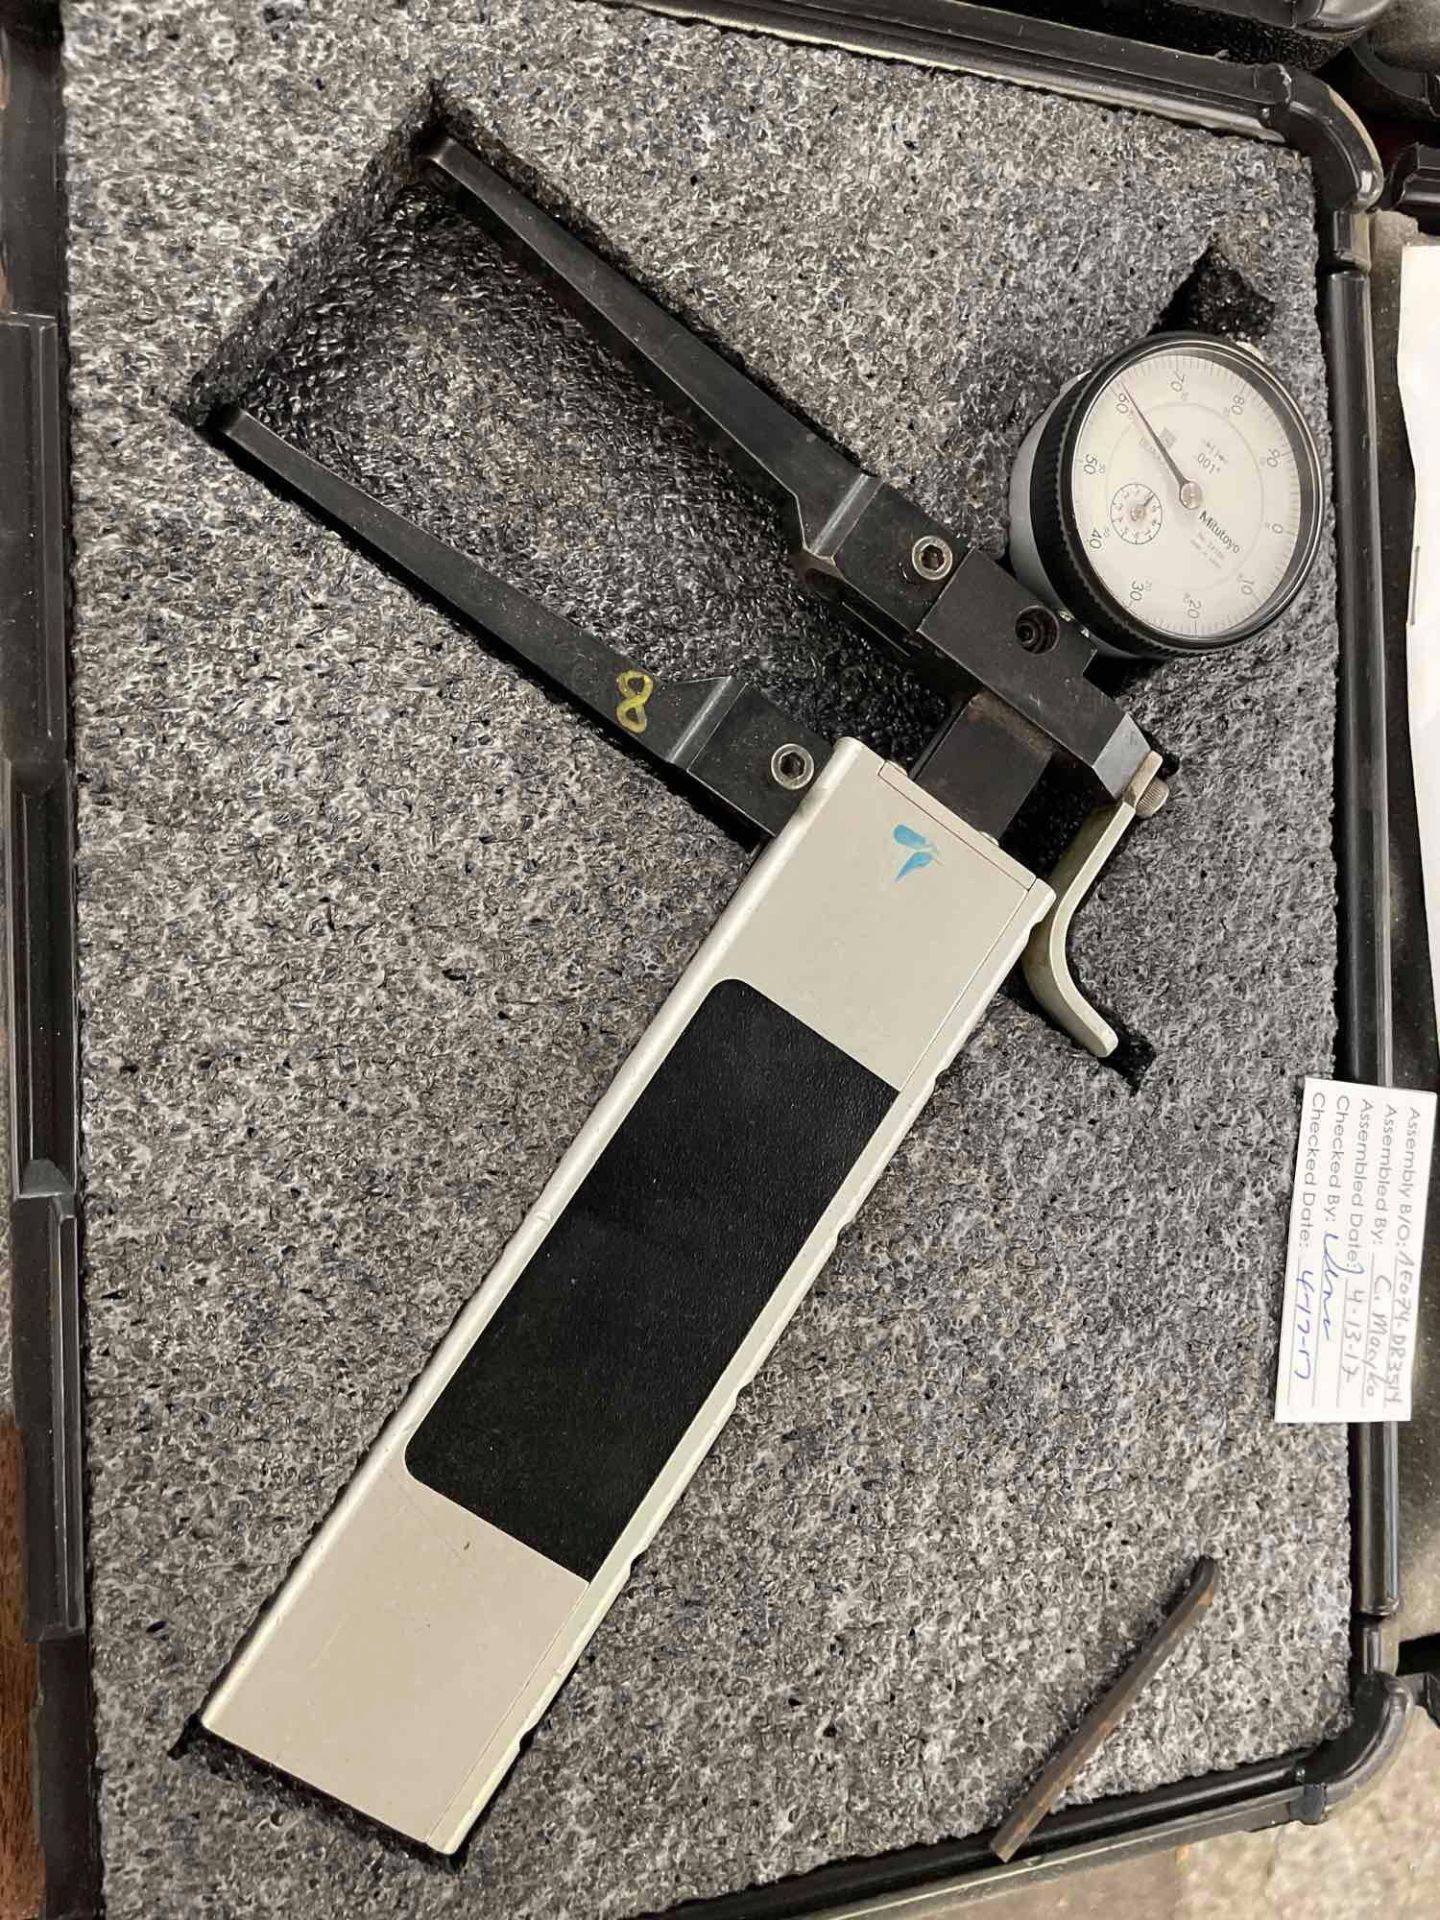 Lot of 2 GAGEMAKER Internal Taper Gage Model: IT-6000 in GAGEMAKER Box. See photo. - Image 10 of 10